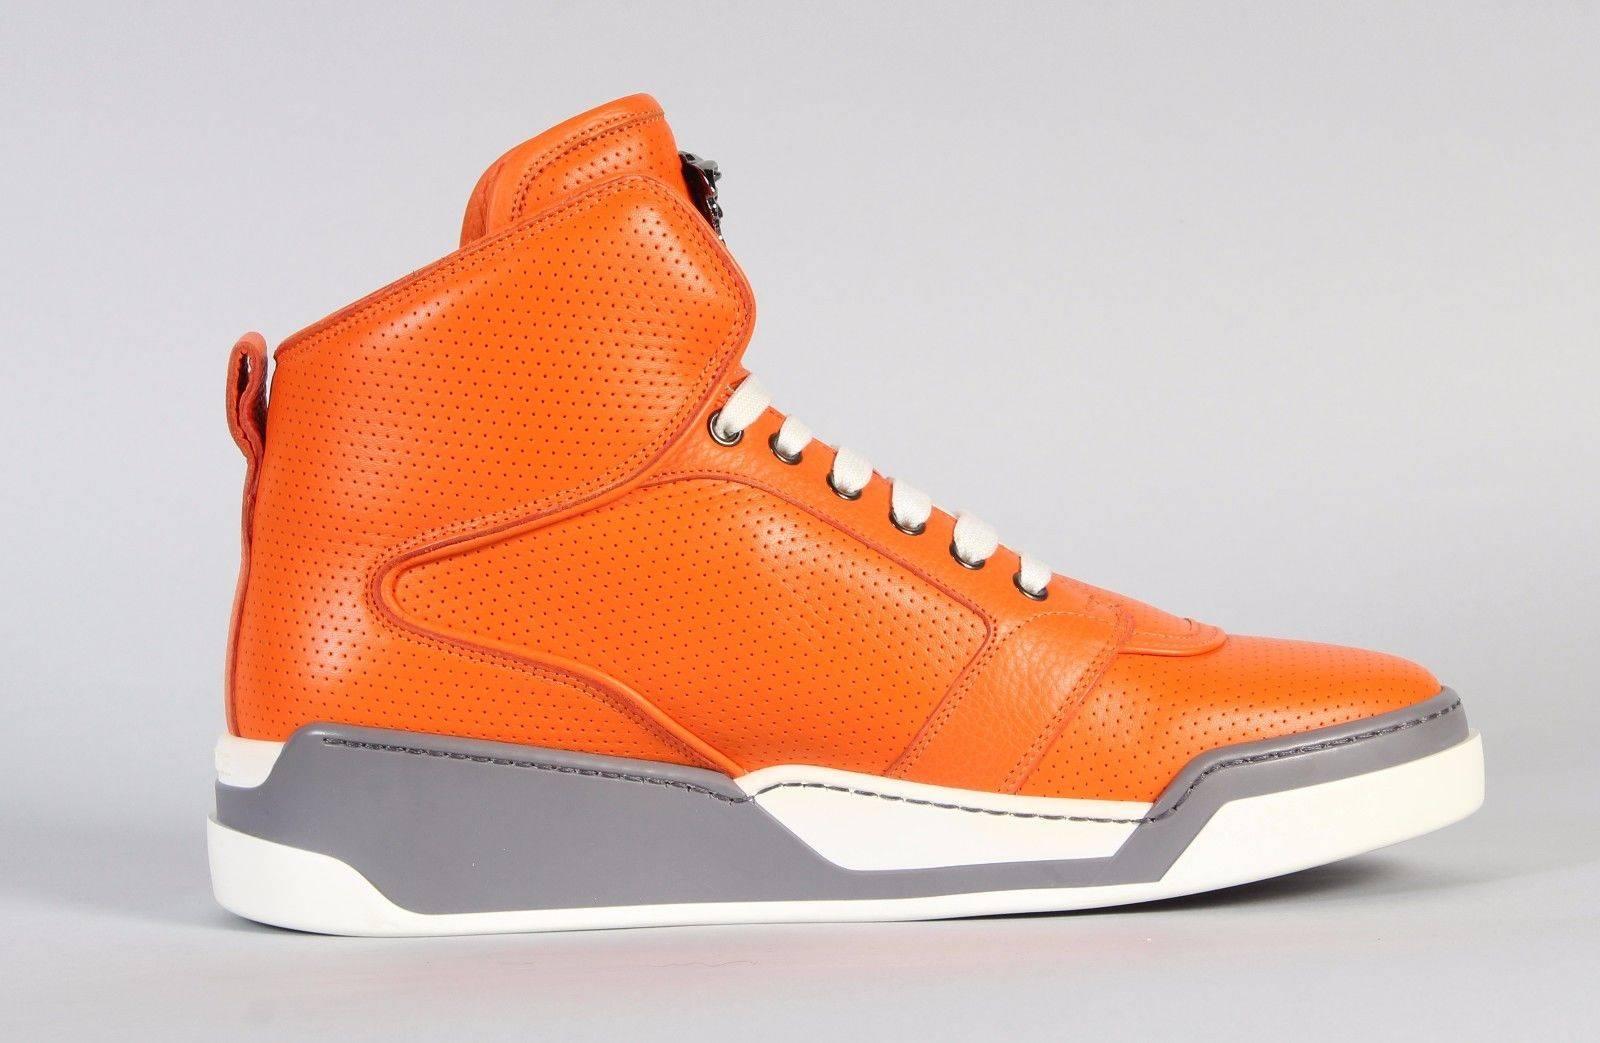 Versace Men's Orange Perforated Leather High-Top Sneakers For Sale at ...